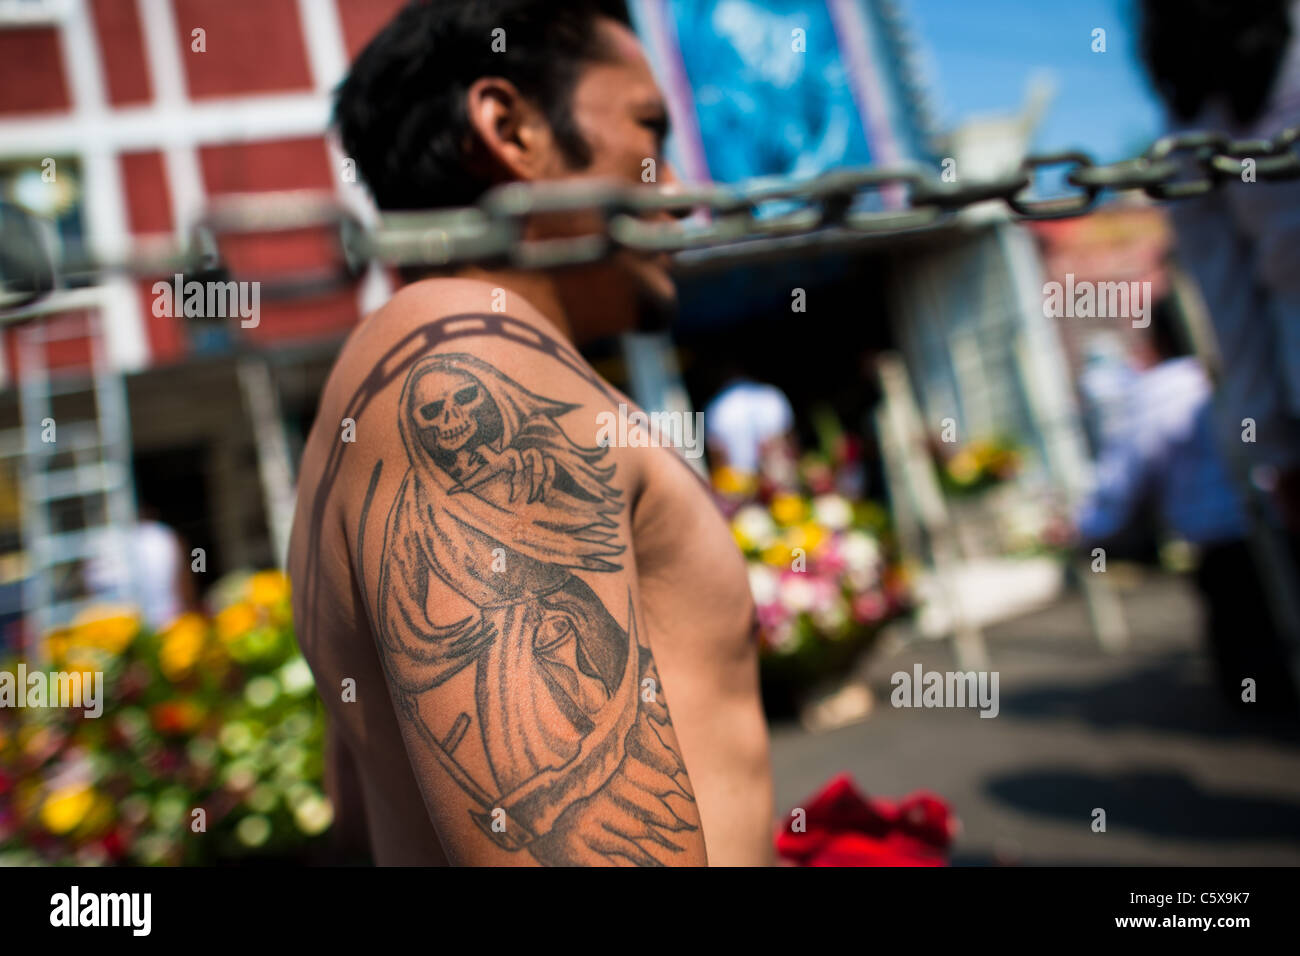 42 Dramatic Mexican Tattoos A Look into the Dark World of the Mexican  Tattoo